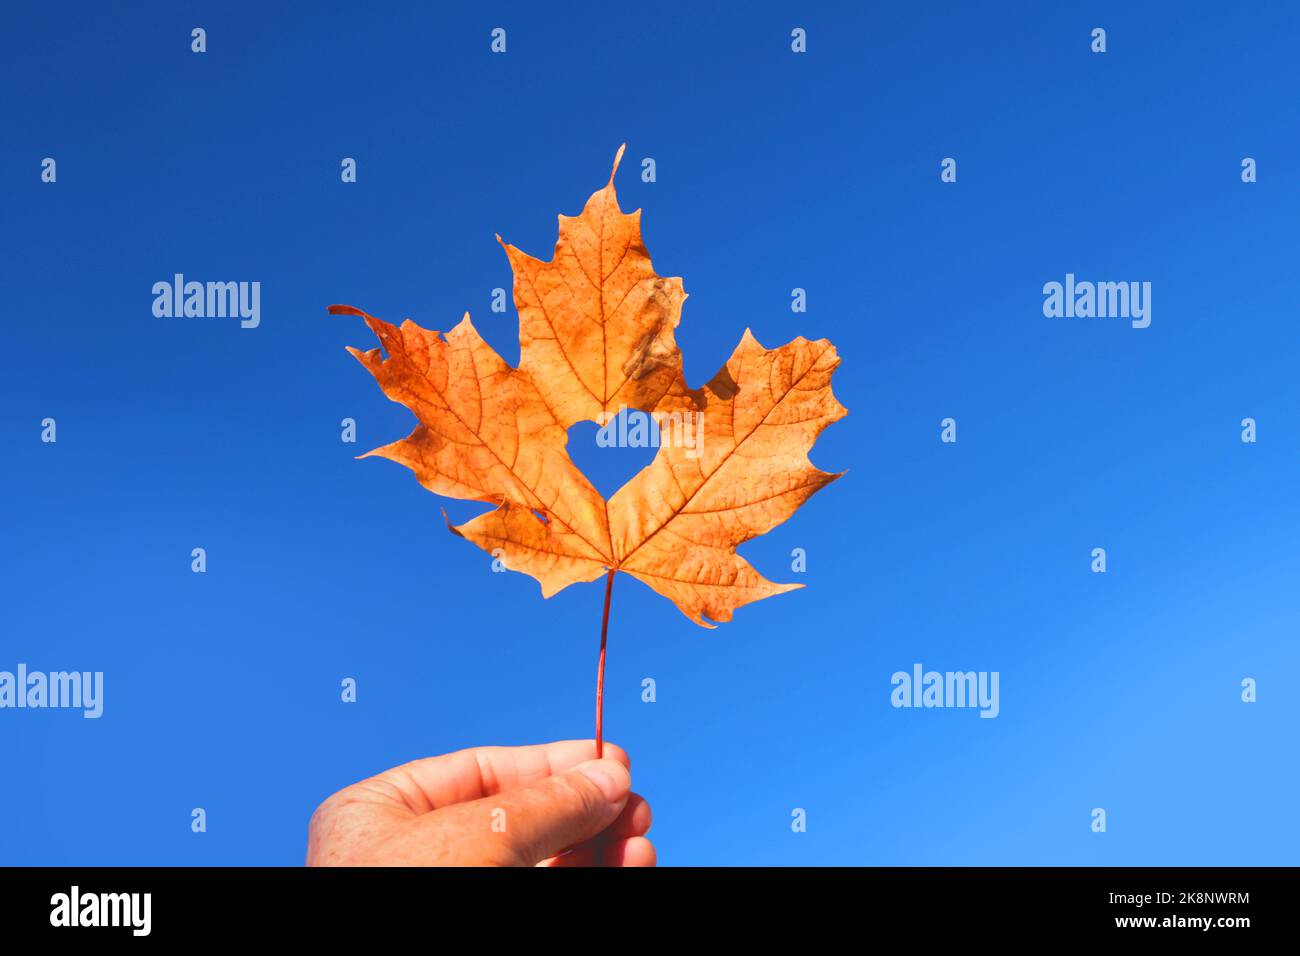 Fingers holding stem of fall leaves agasint sky with cut outs Stock Photo